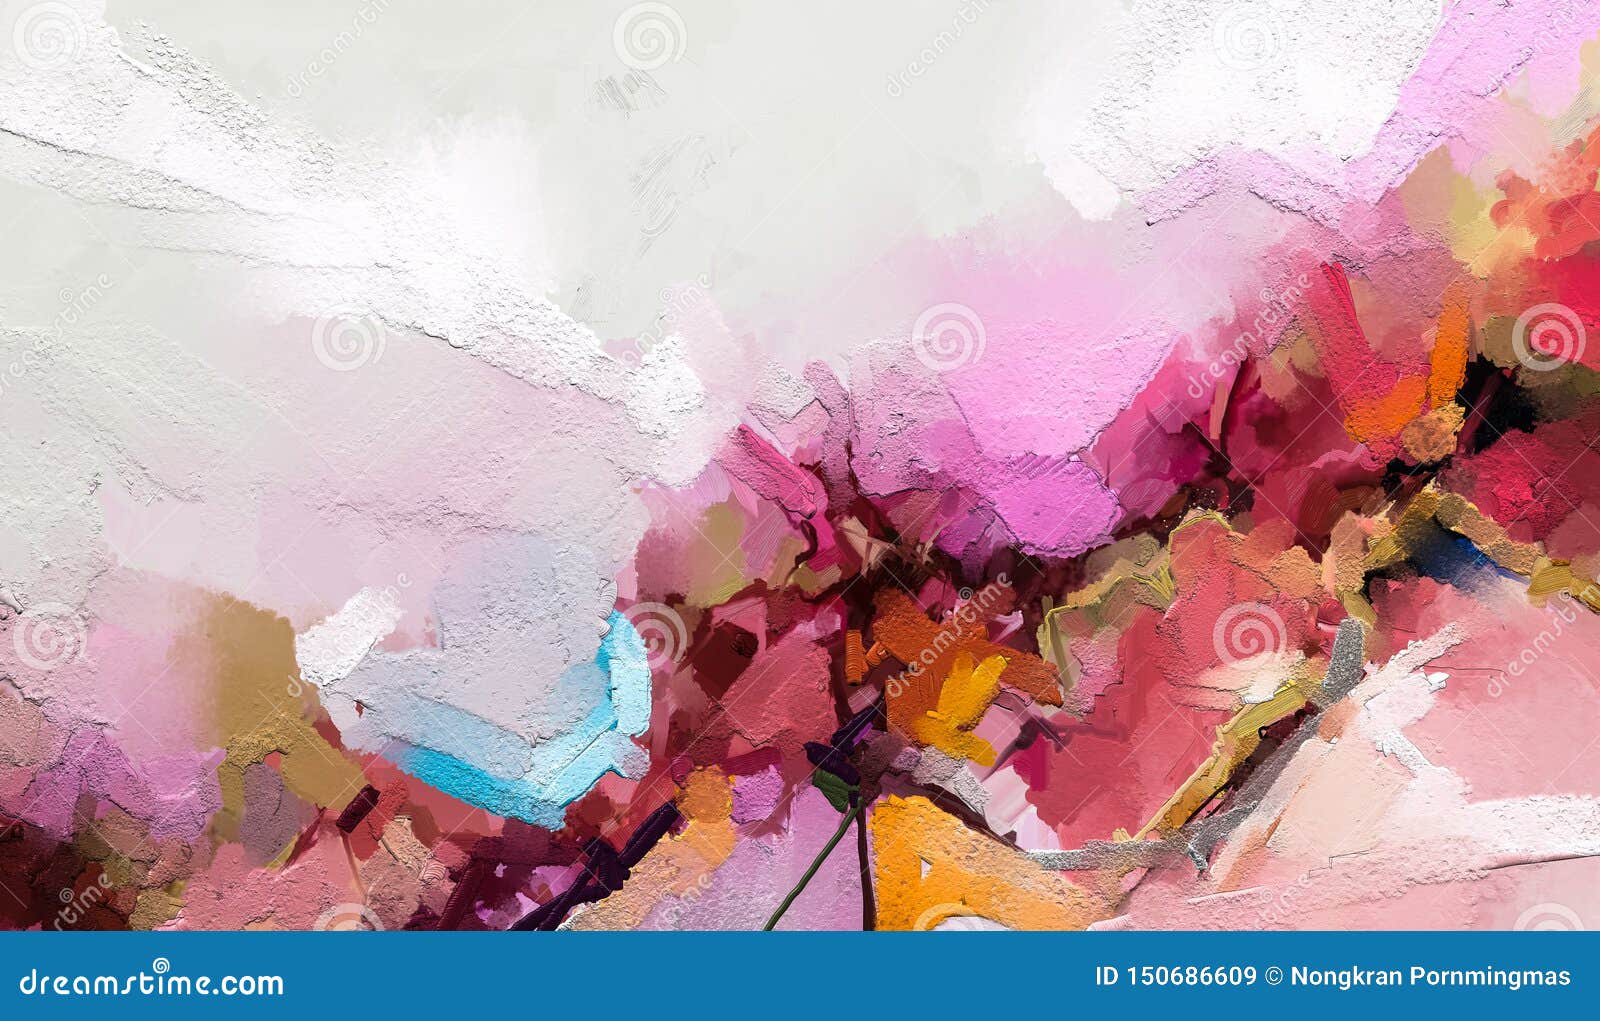 Abstract Colorful Oil, Acrylic Paint Brush Stroke on Canvas Texture. Semi  Abstract Image of Landscape Painting Background Stock Illustration -  Illustration of backdrop, nature: 150686609